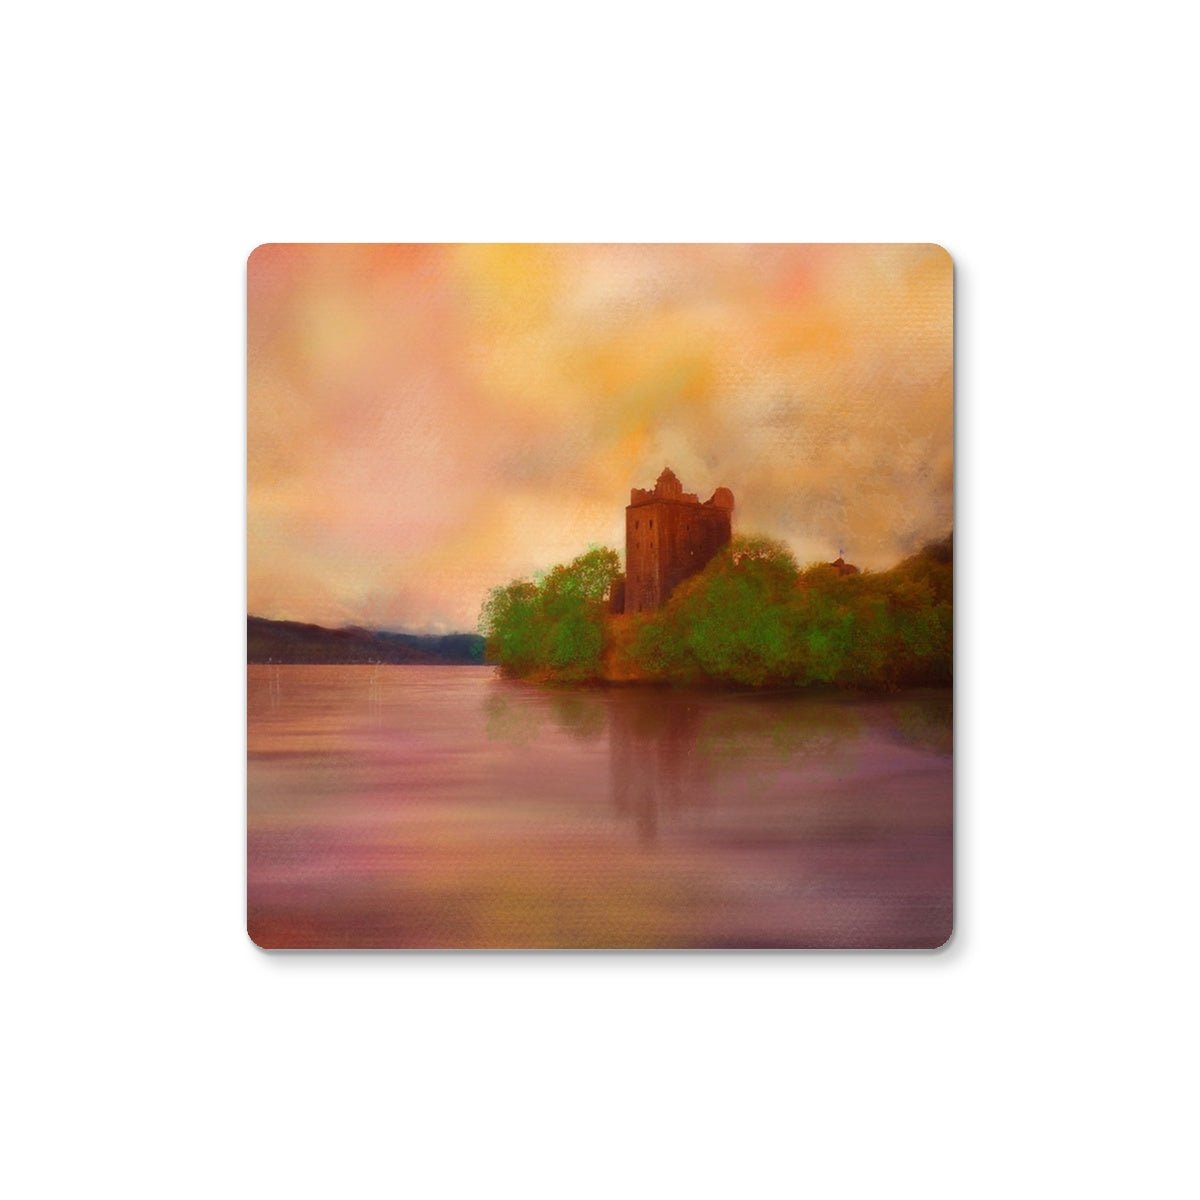 Urquhart Castle Art Gifts Coaster-Coasters-Scottish Castles Art Gallery-Single Coaster-Paintings, Prints, Homeware, Art Gifts From Scotland By Scottish Artist Kevin Hunter